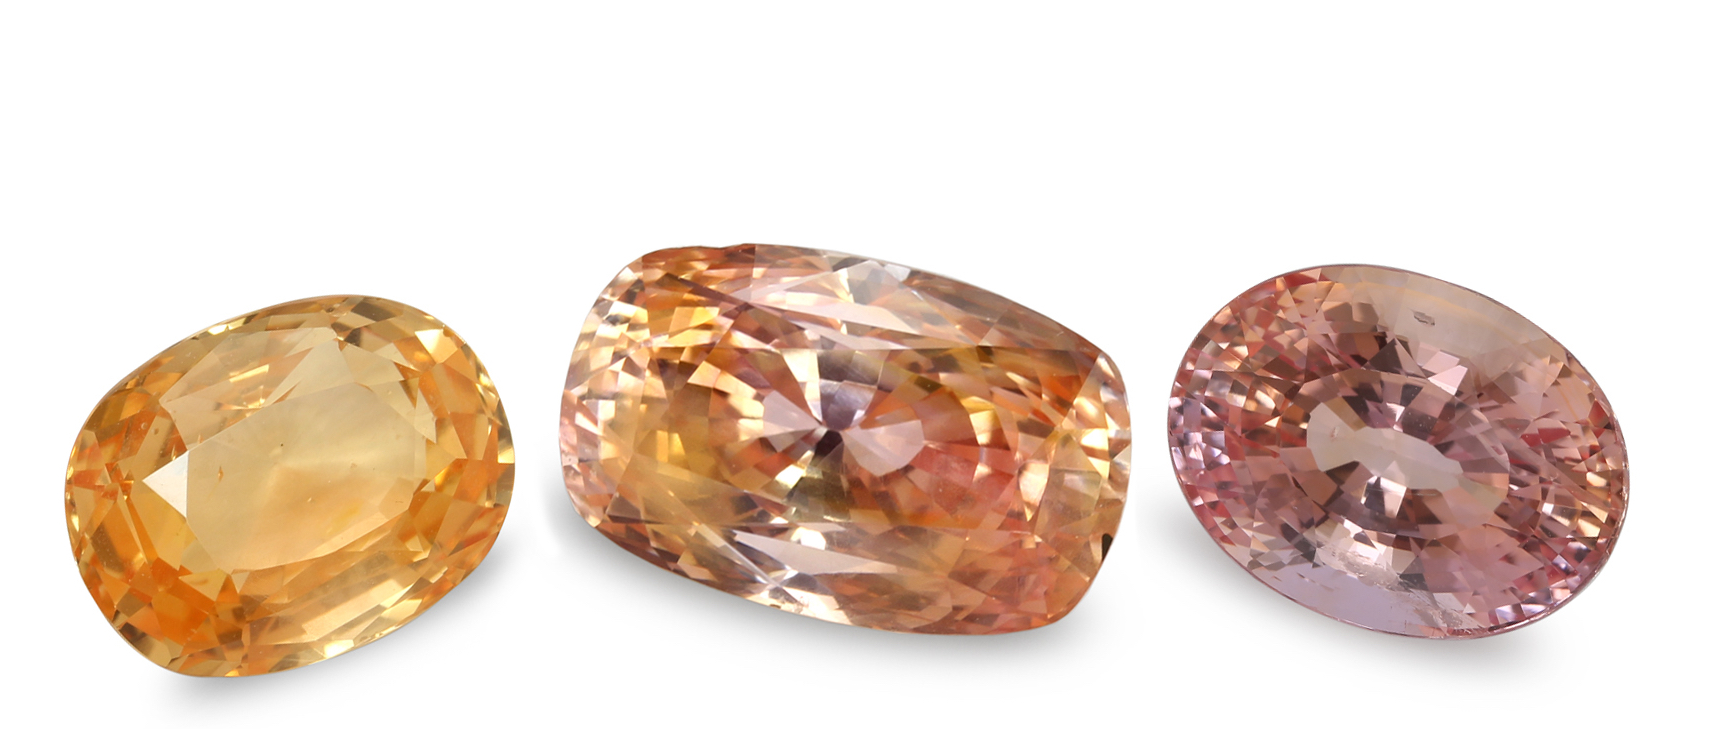 Padparadscha Sapphire Meanings, Properties and Uses